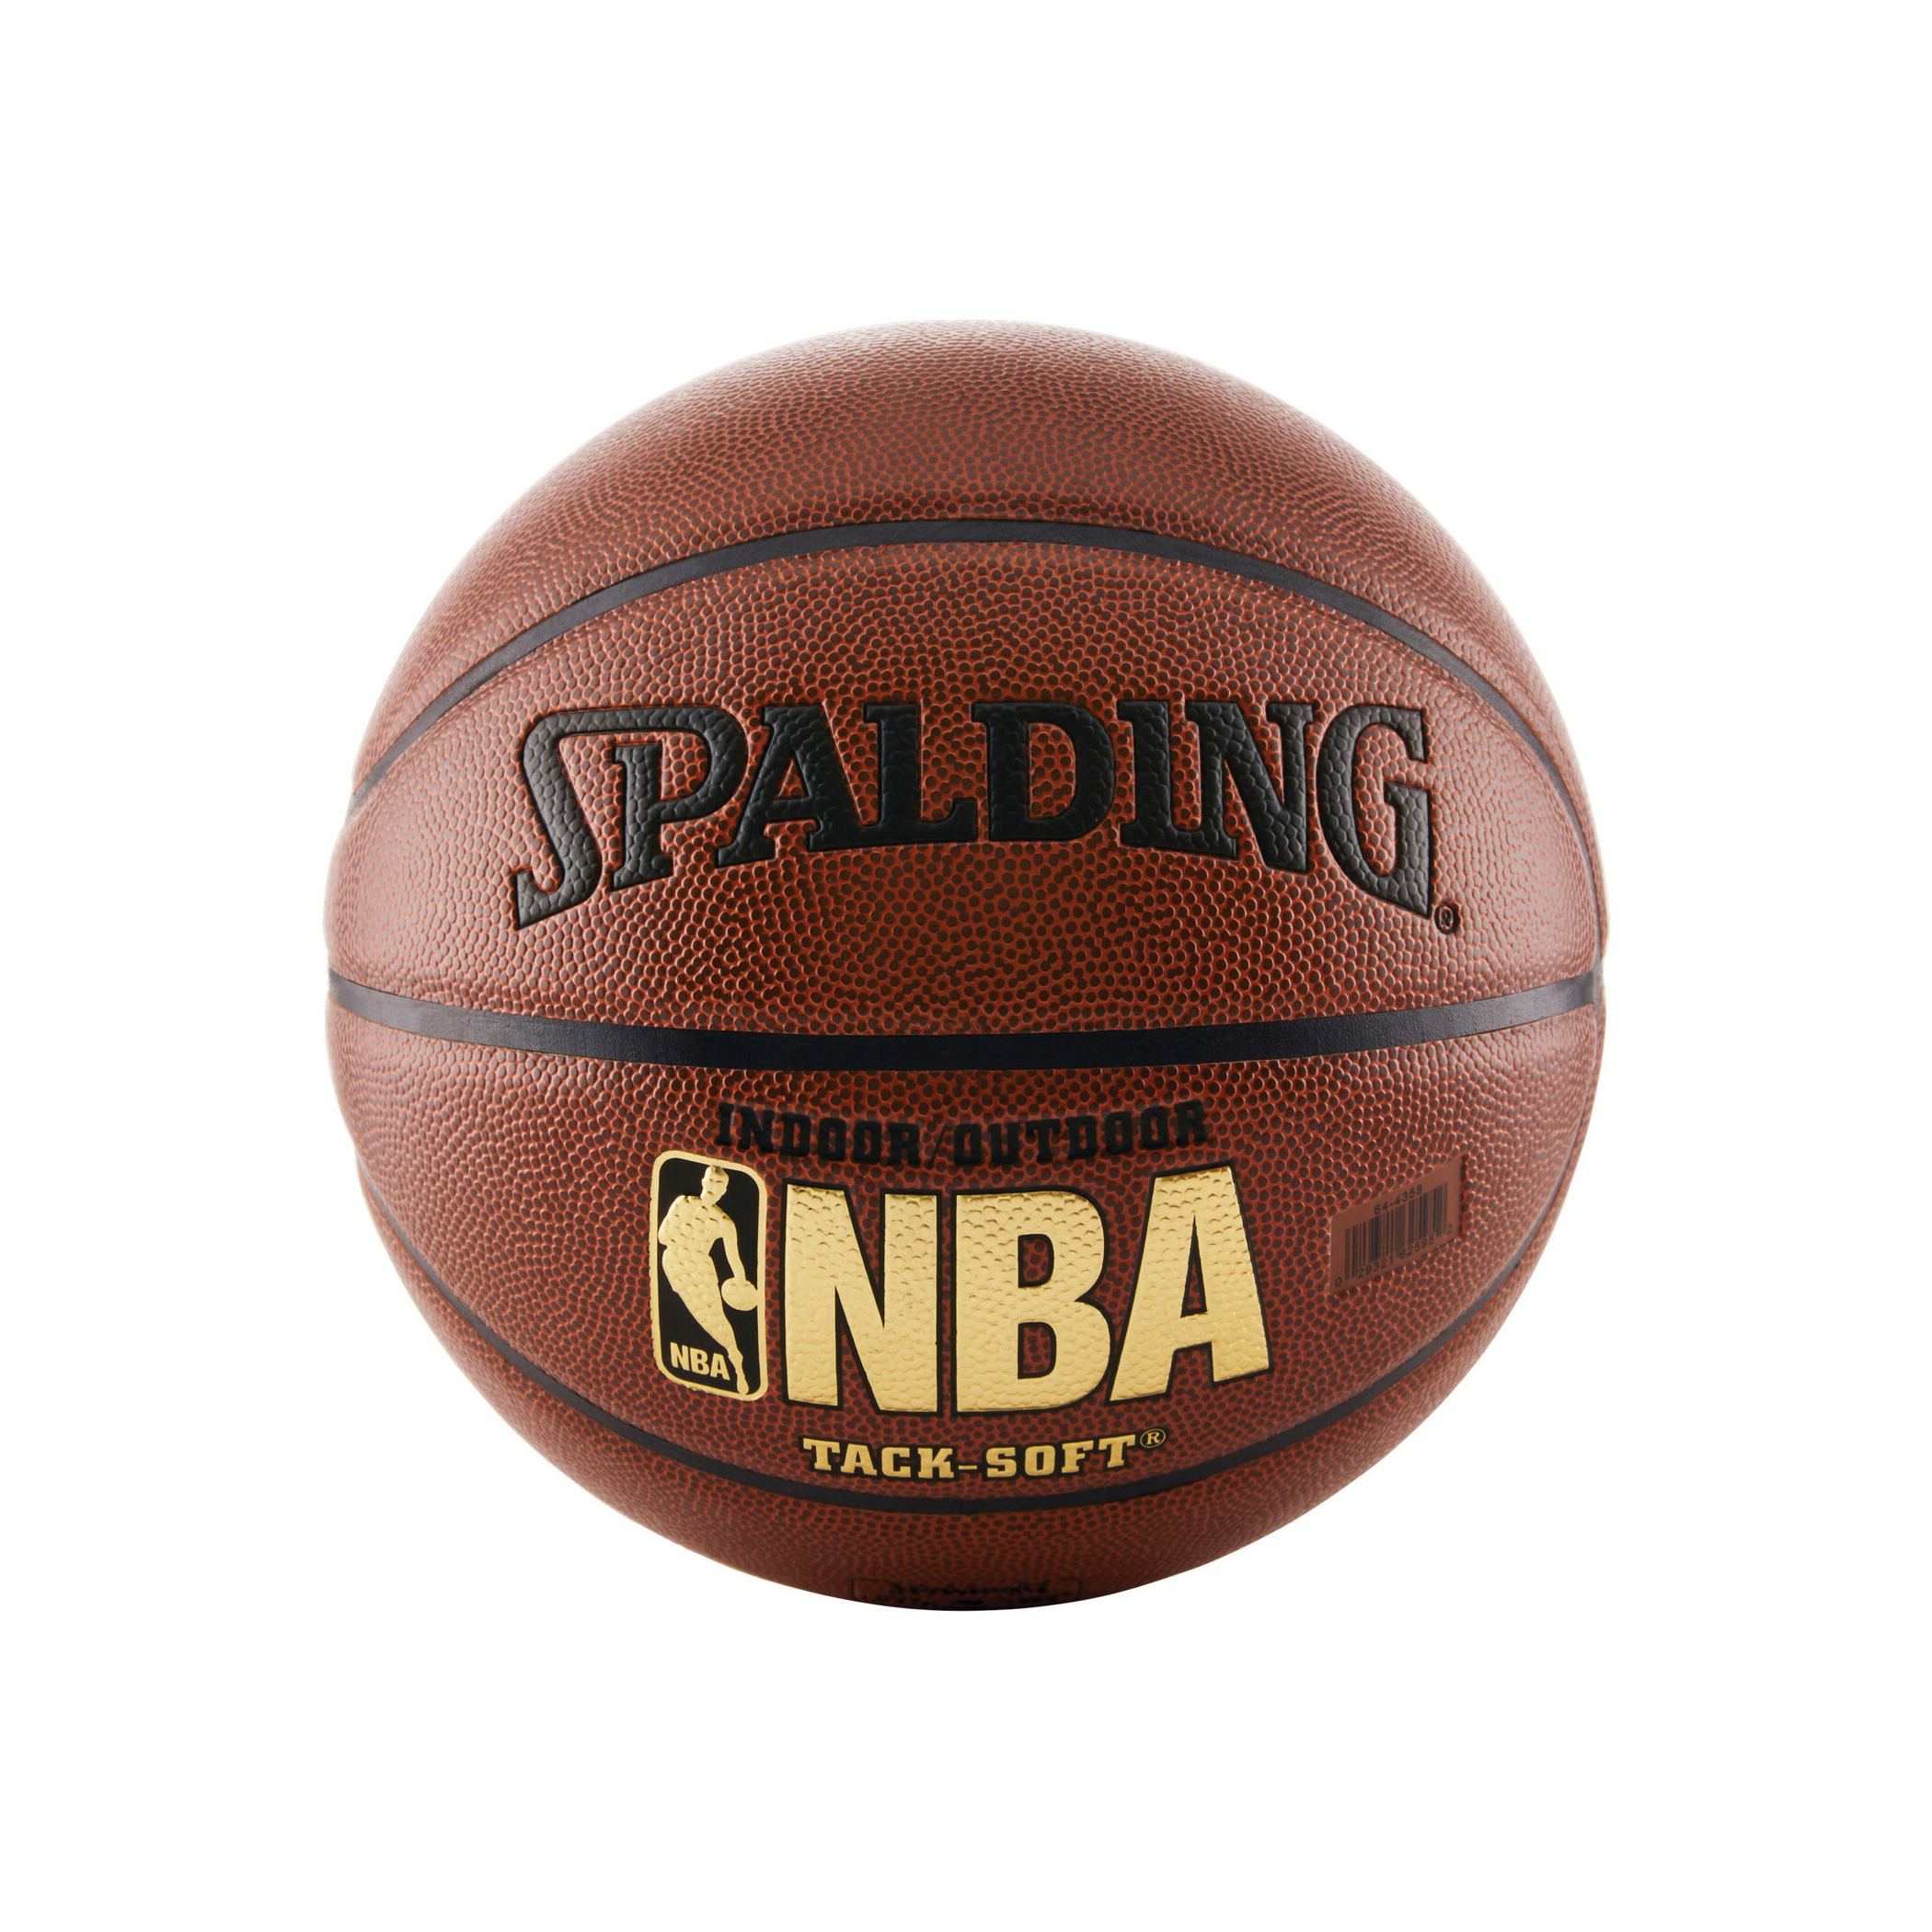 Spalding 64-435 Basketball, 29-1/2 in Dia, Leather - 3